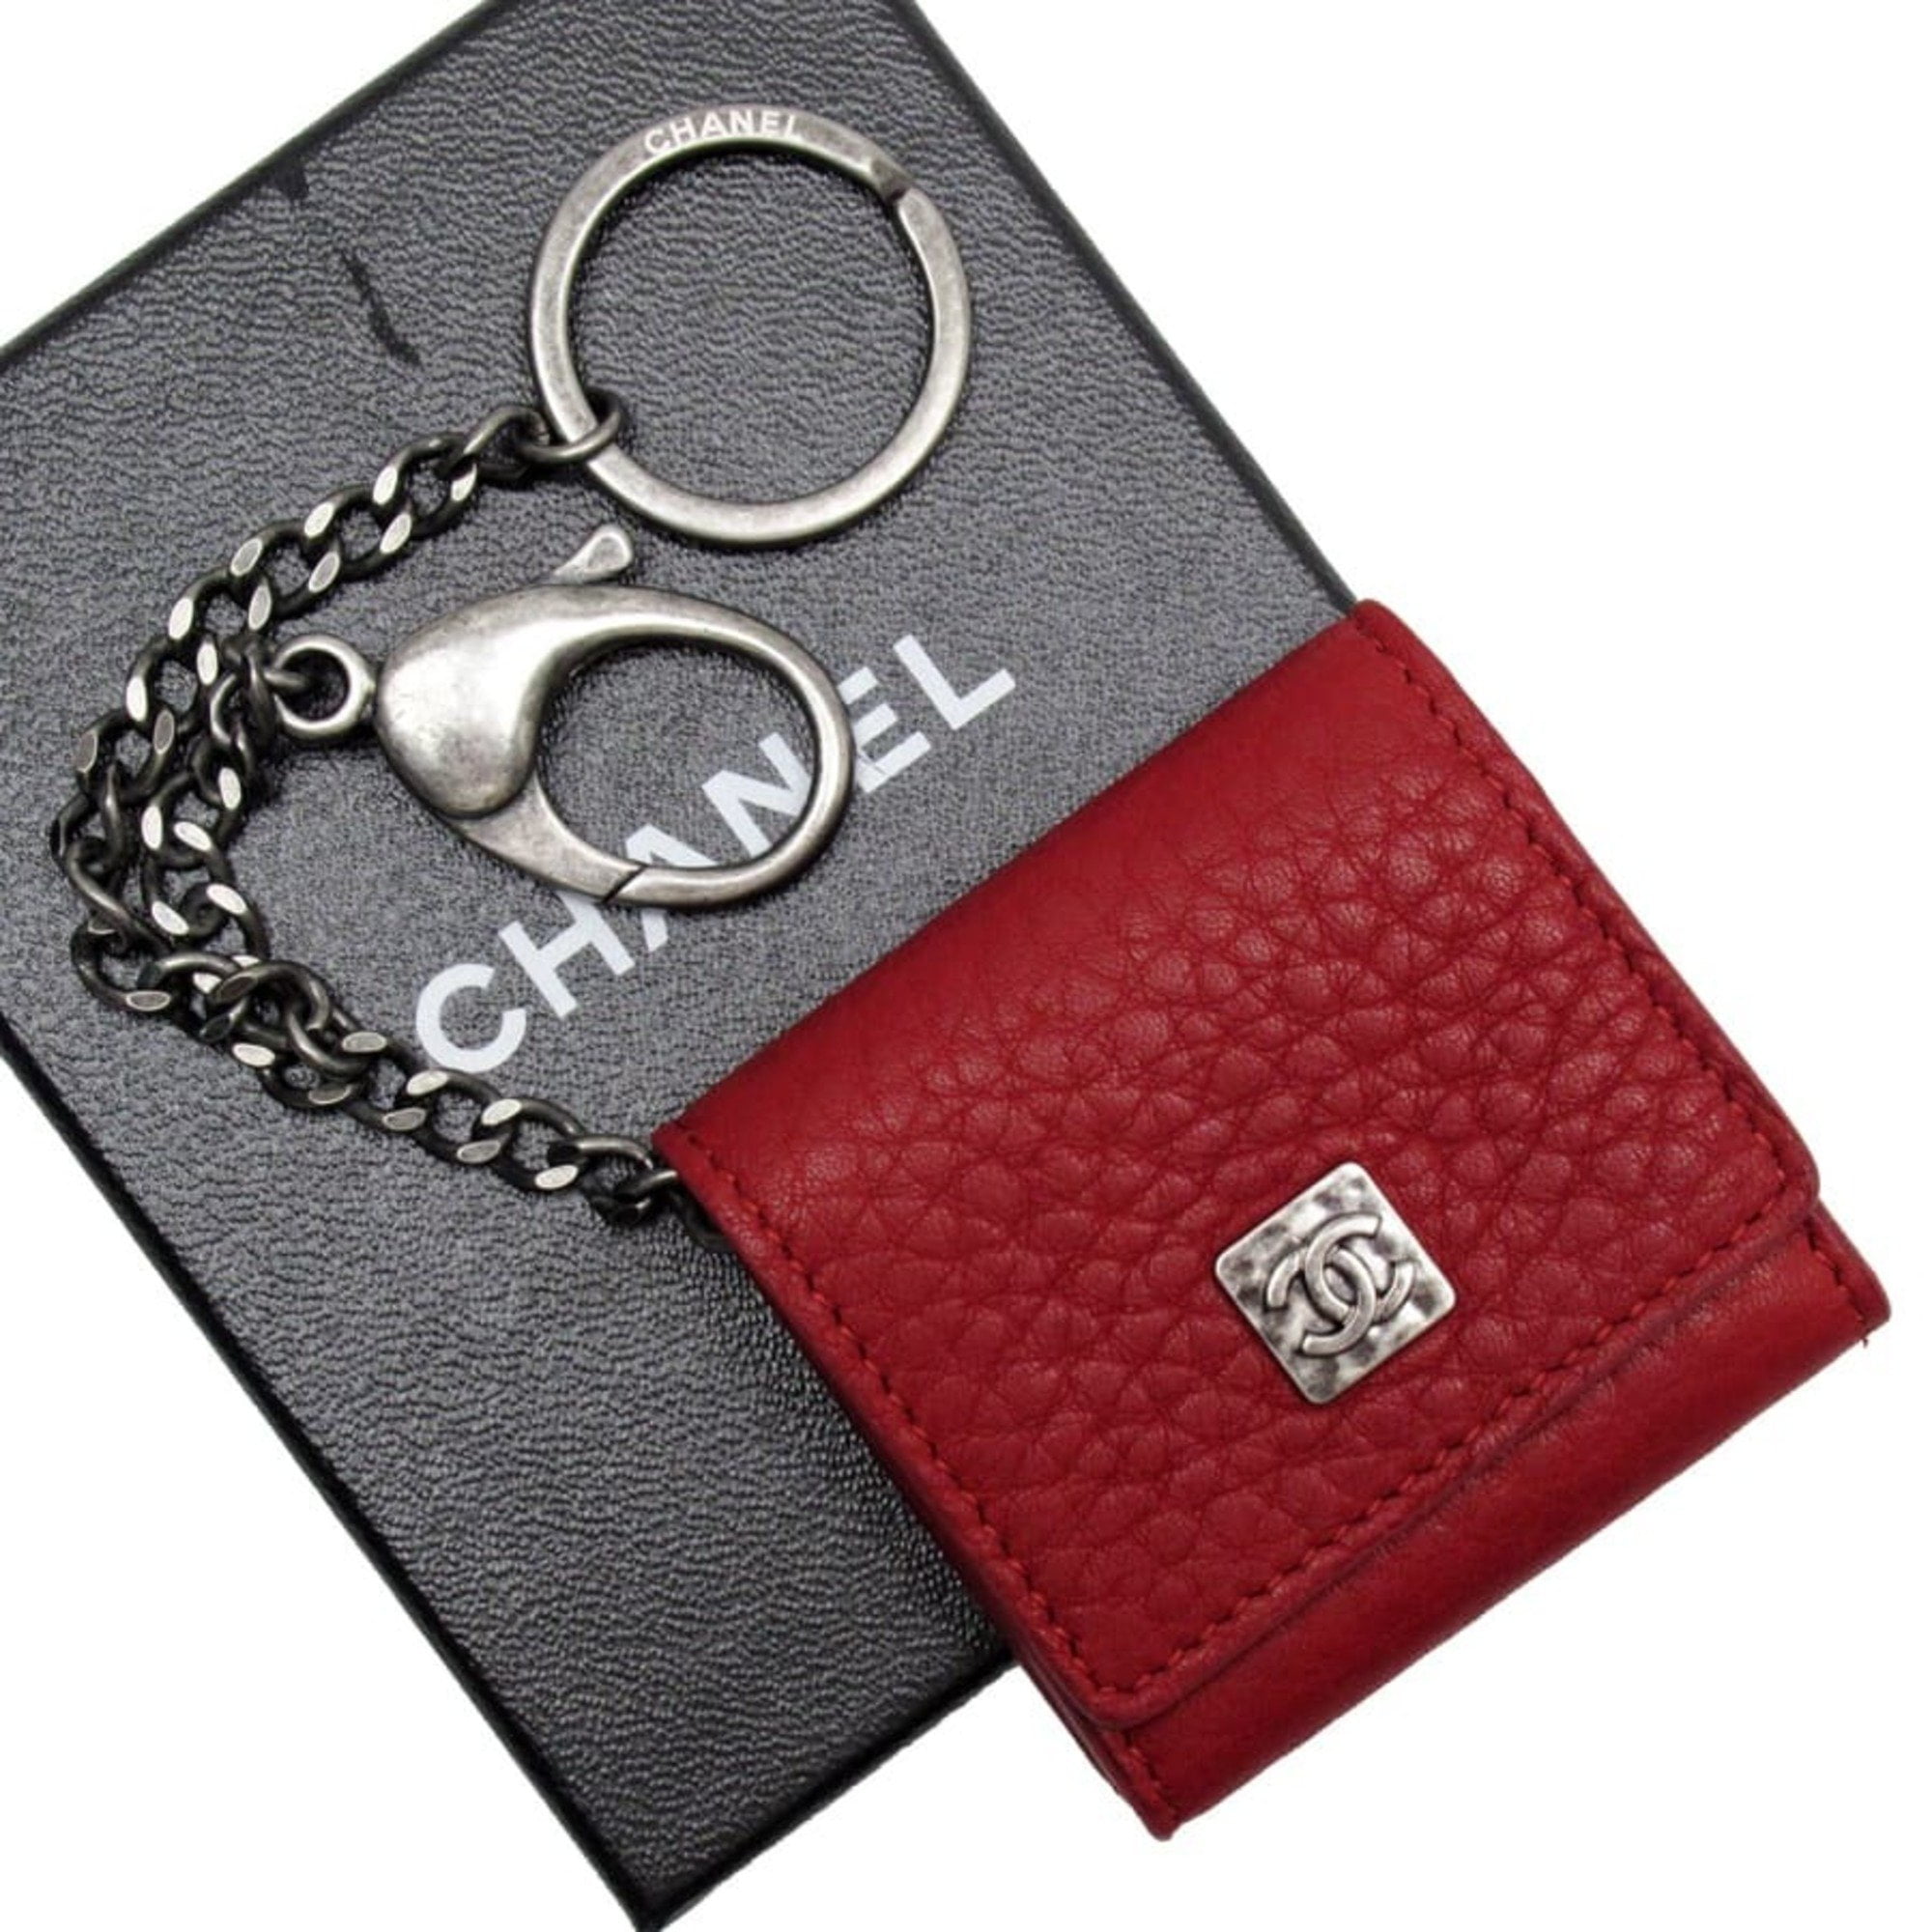 CHANEL Caviar Quilted Key Holder Case Pink 429987  FASHIONPHILE